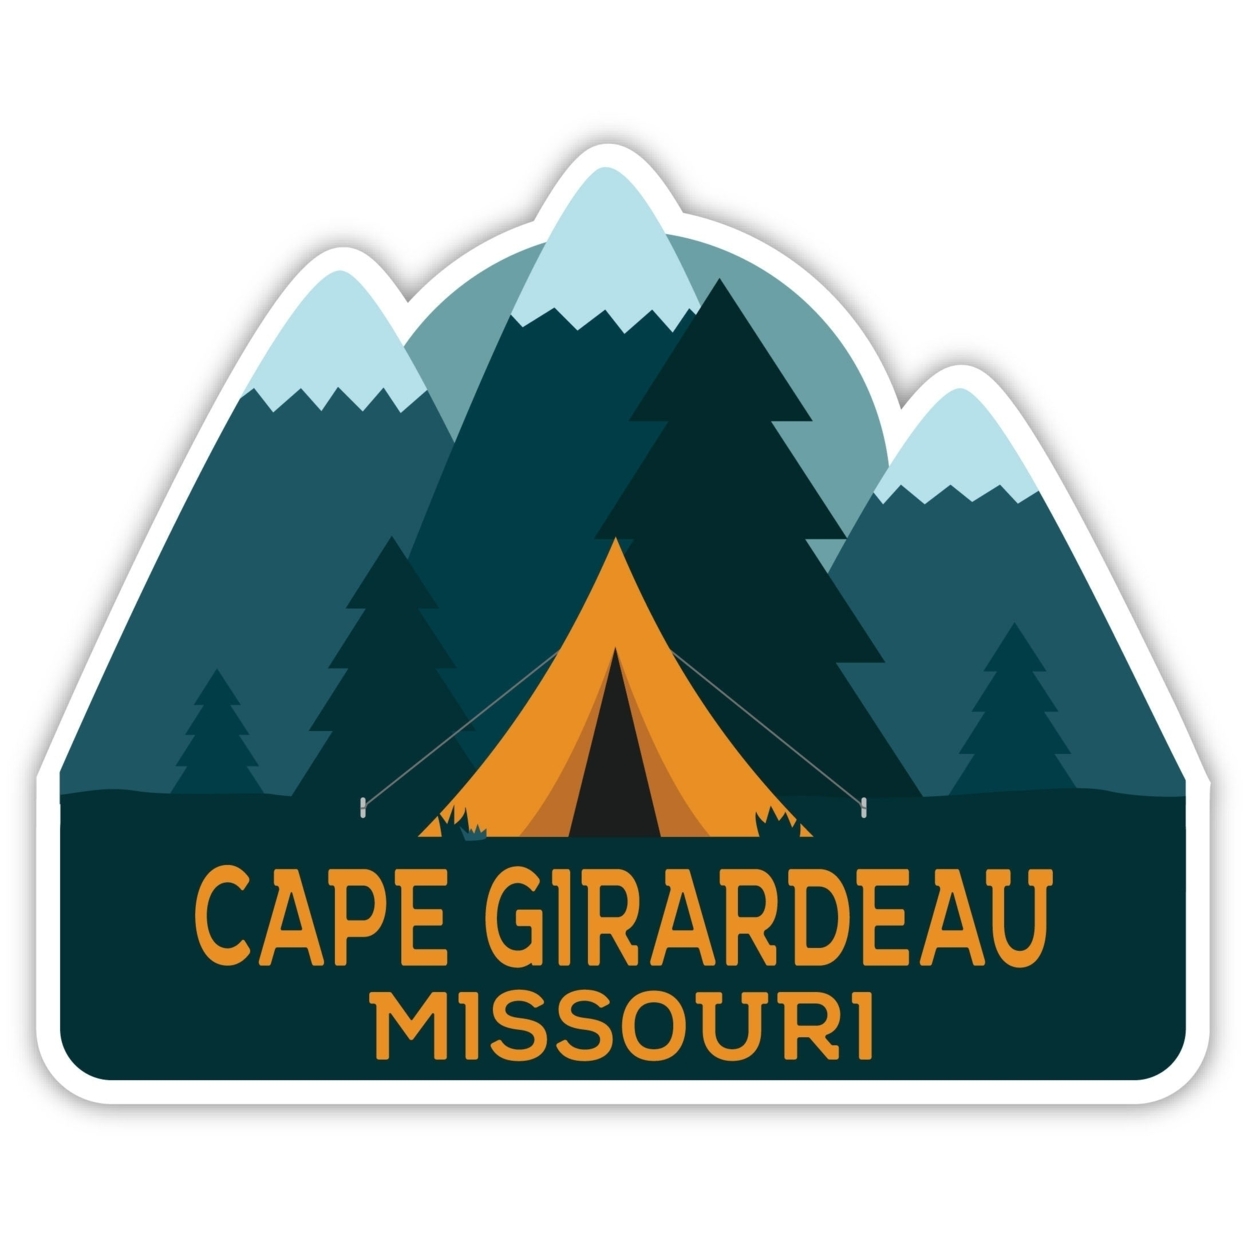 Cape Girardeau Missouri Souvenir Decorative Stickers (Choose Theme And Size) - 4-Pack, 2-Inch, Great Outdoors